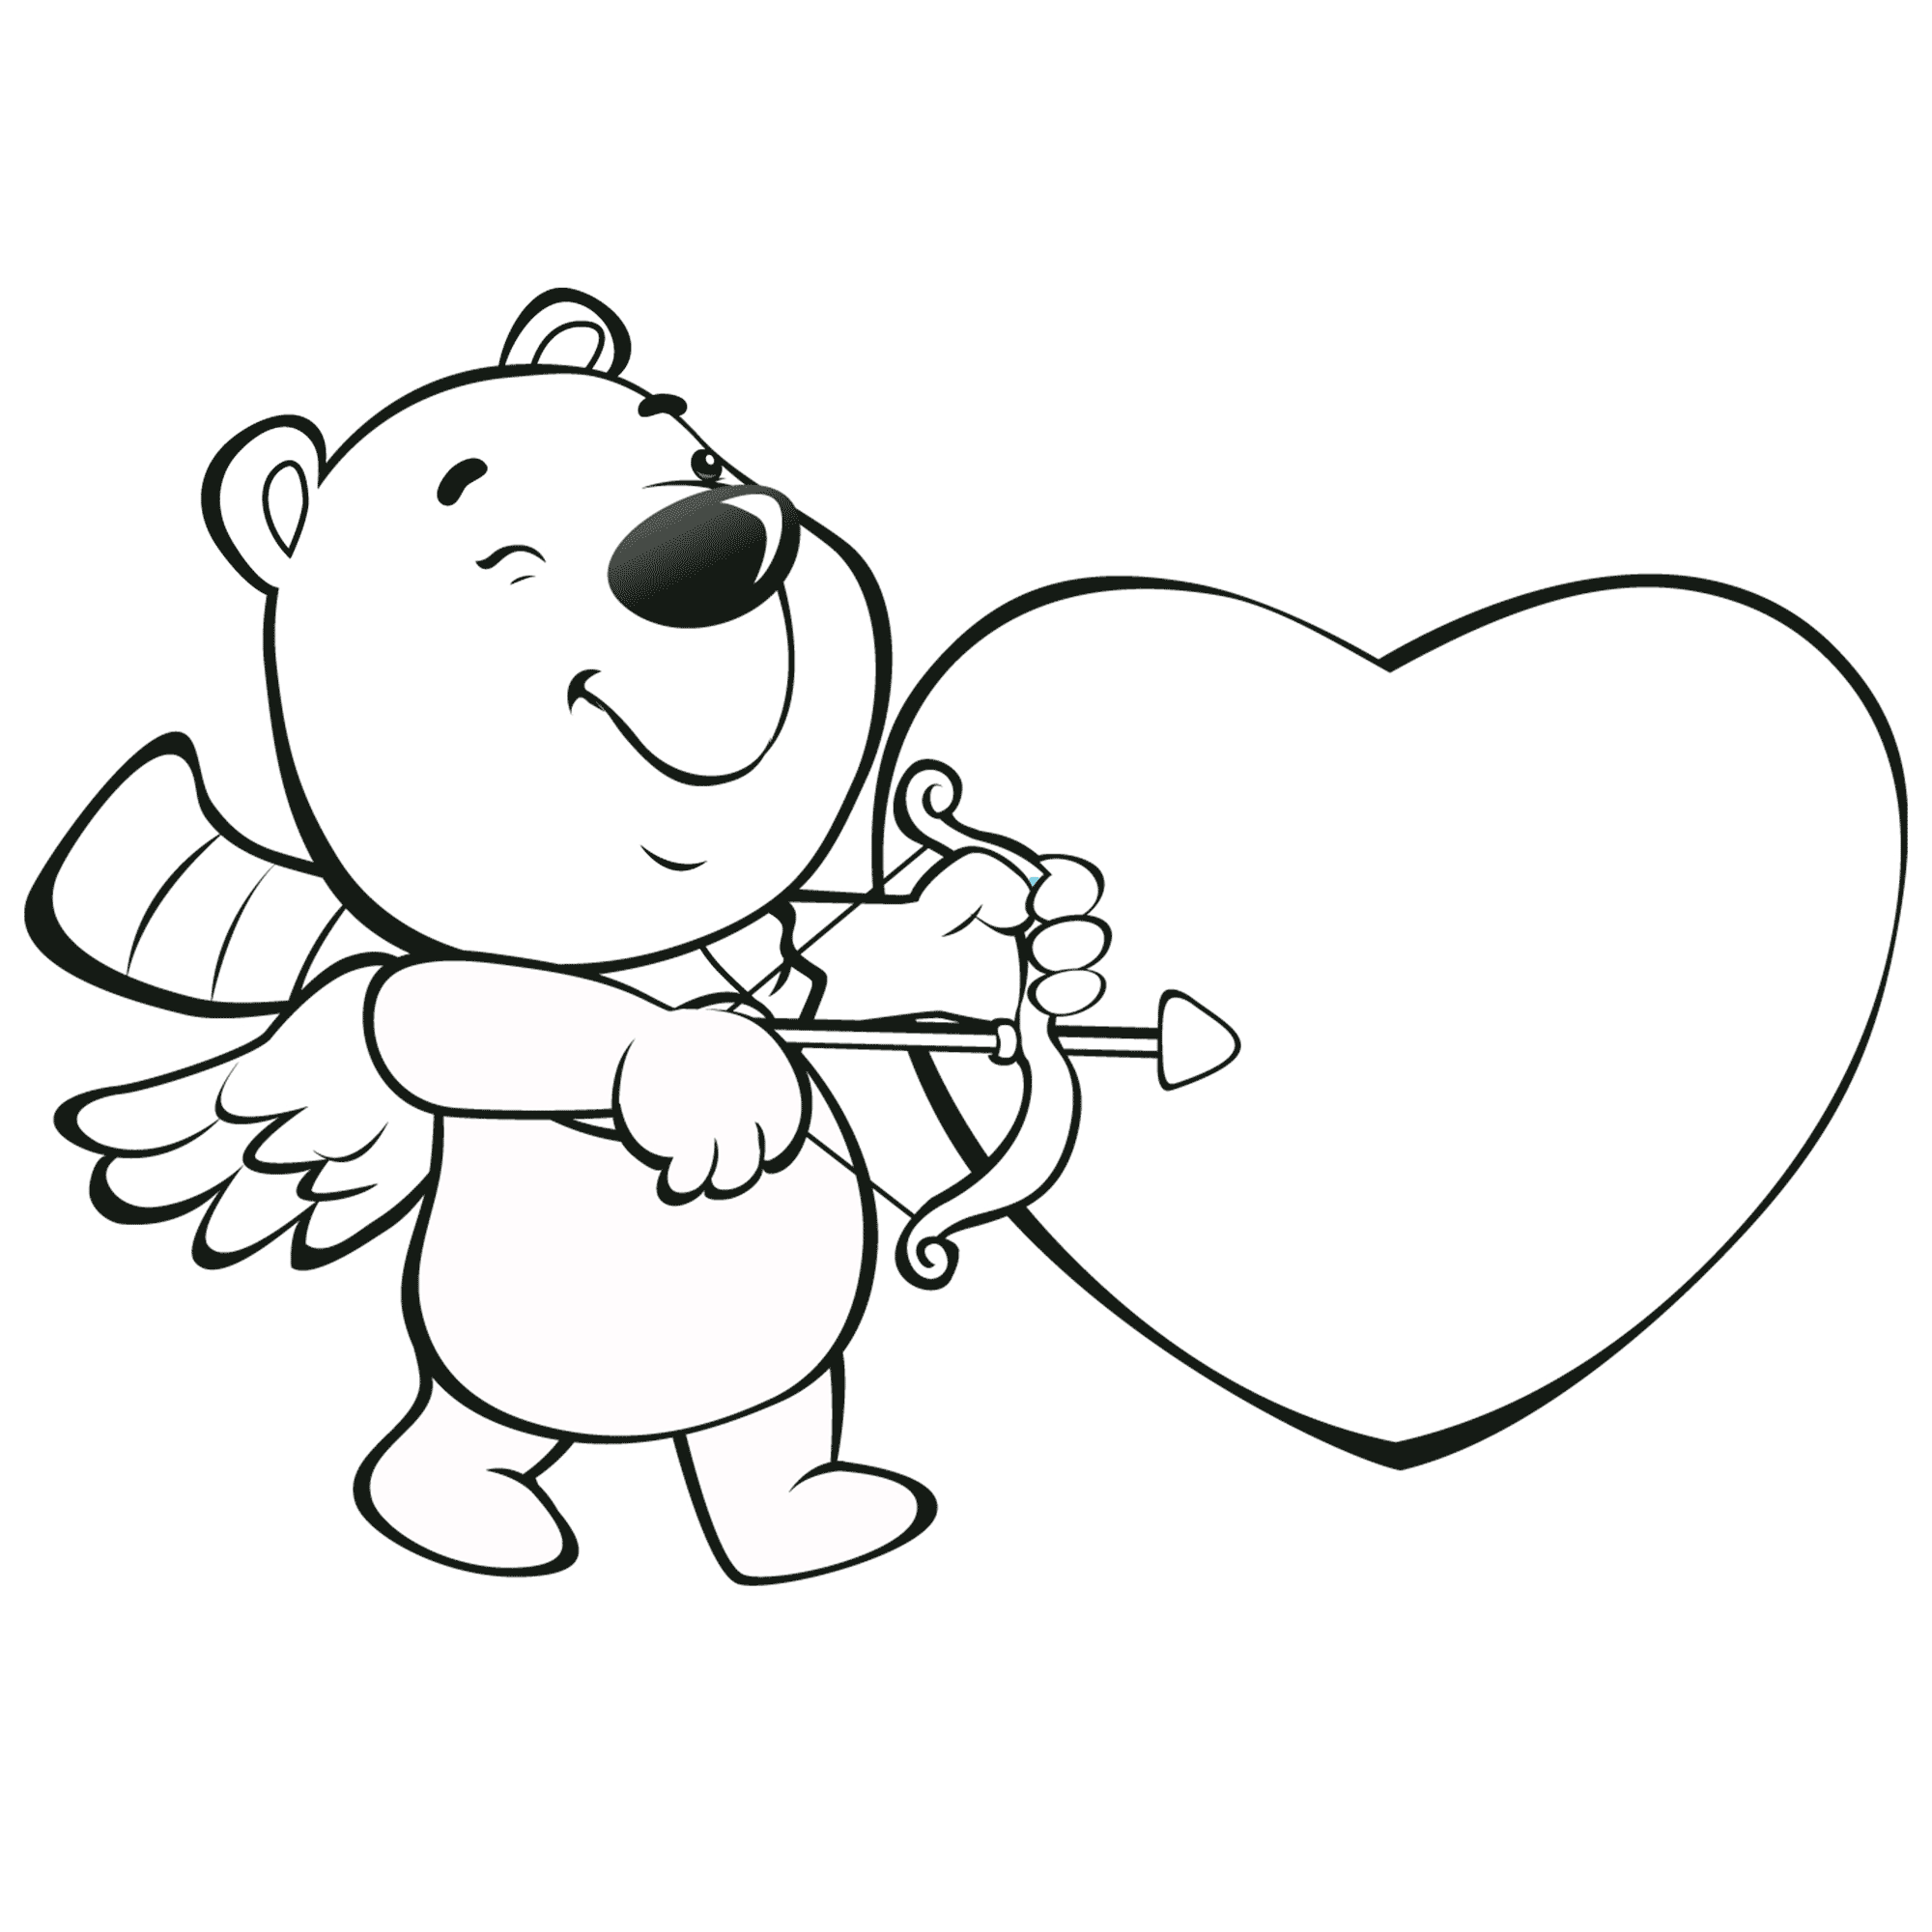 Printable Coloring Pages for Valentine's Day - Celebration and ...